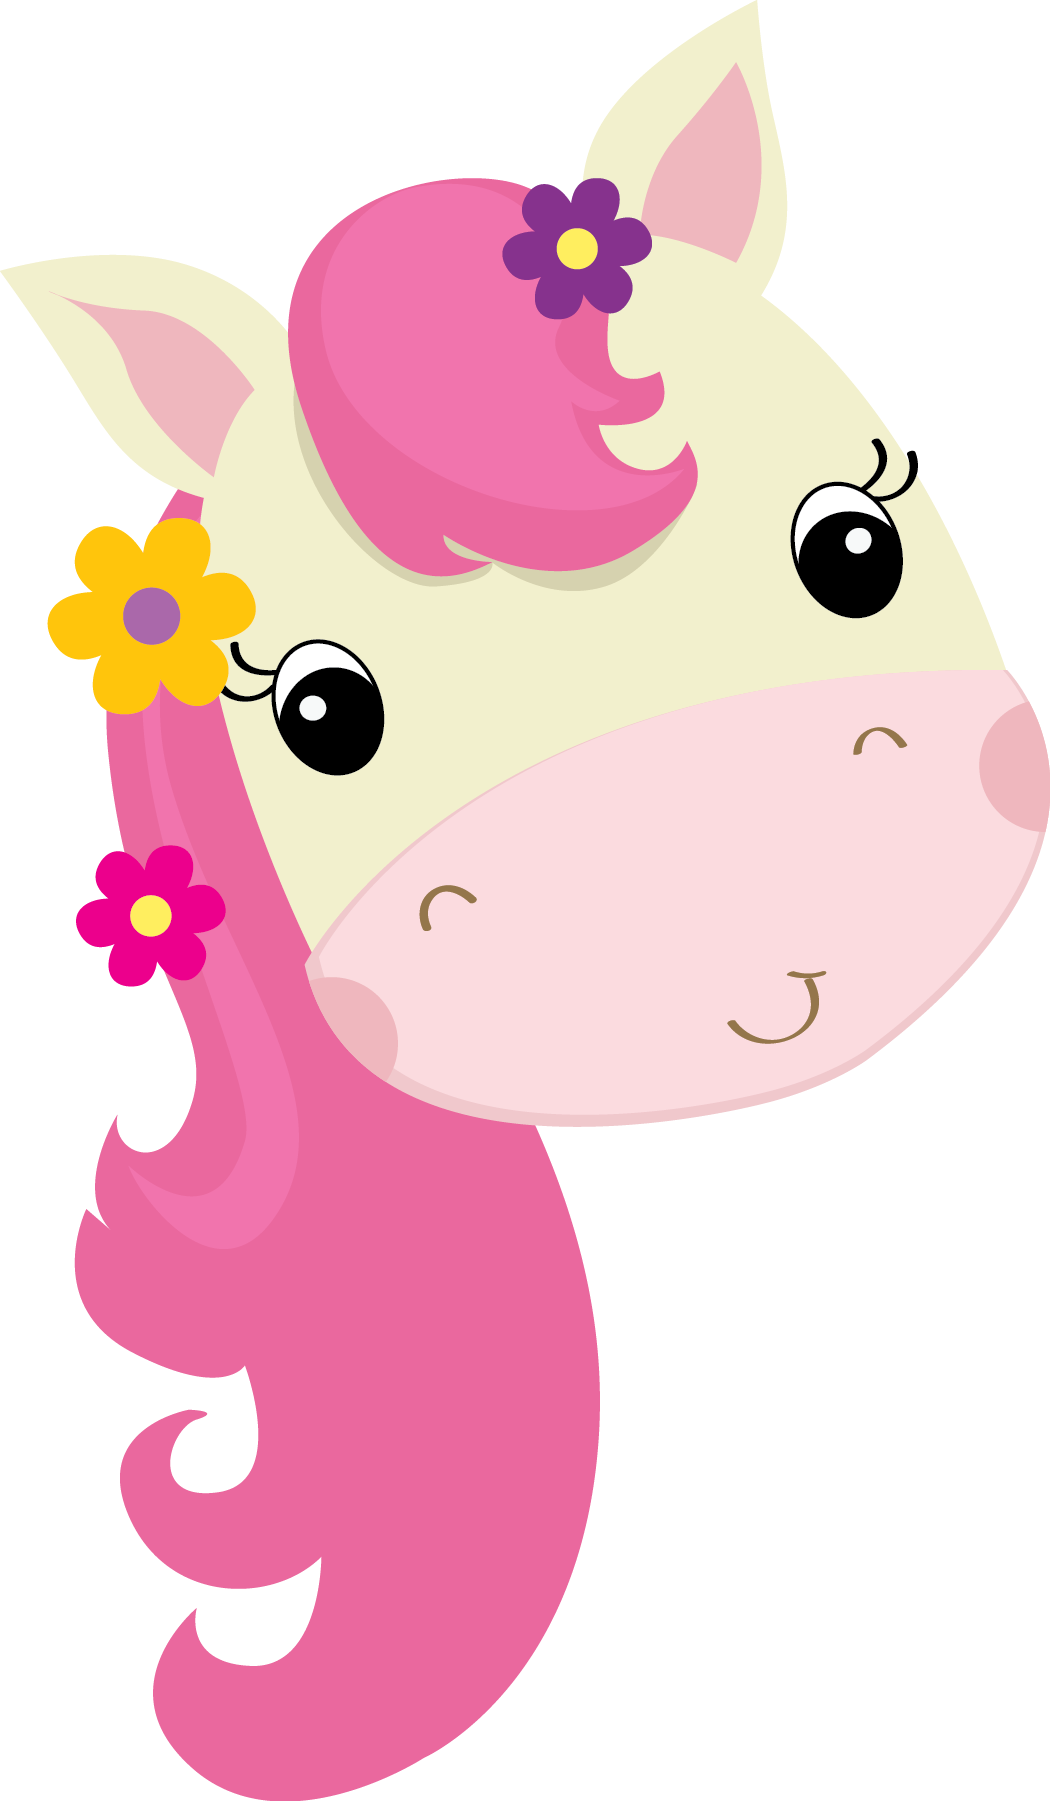 Clipart dragon unicorn. Photo shared on meowchat